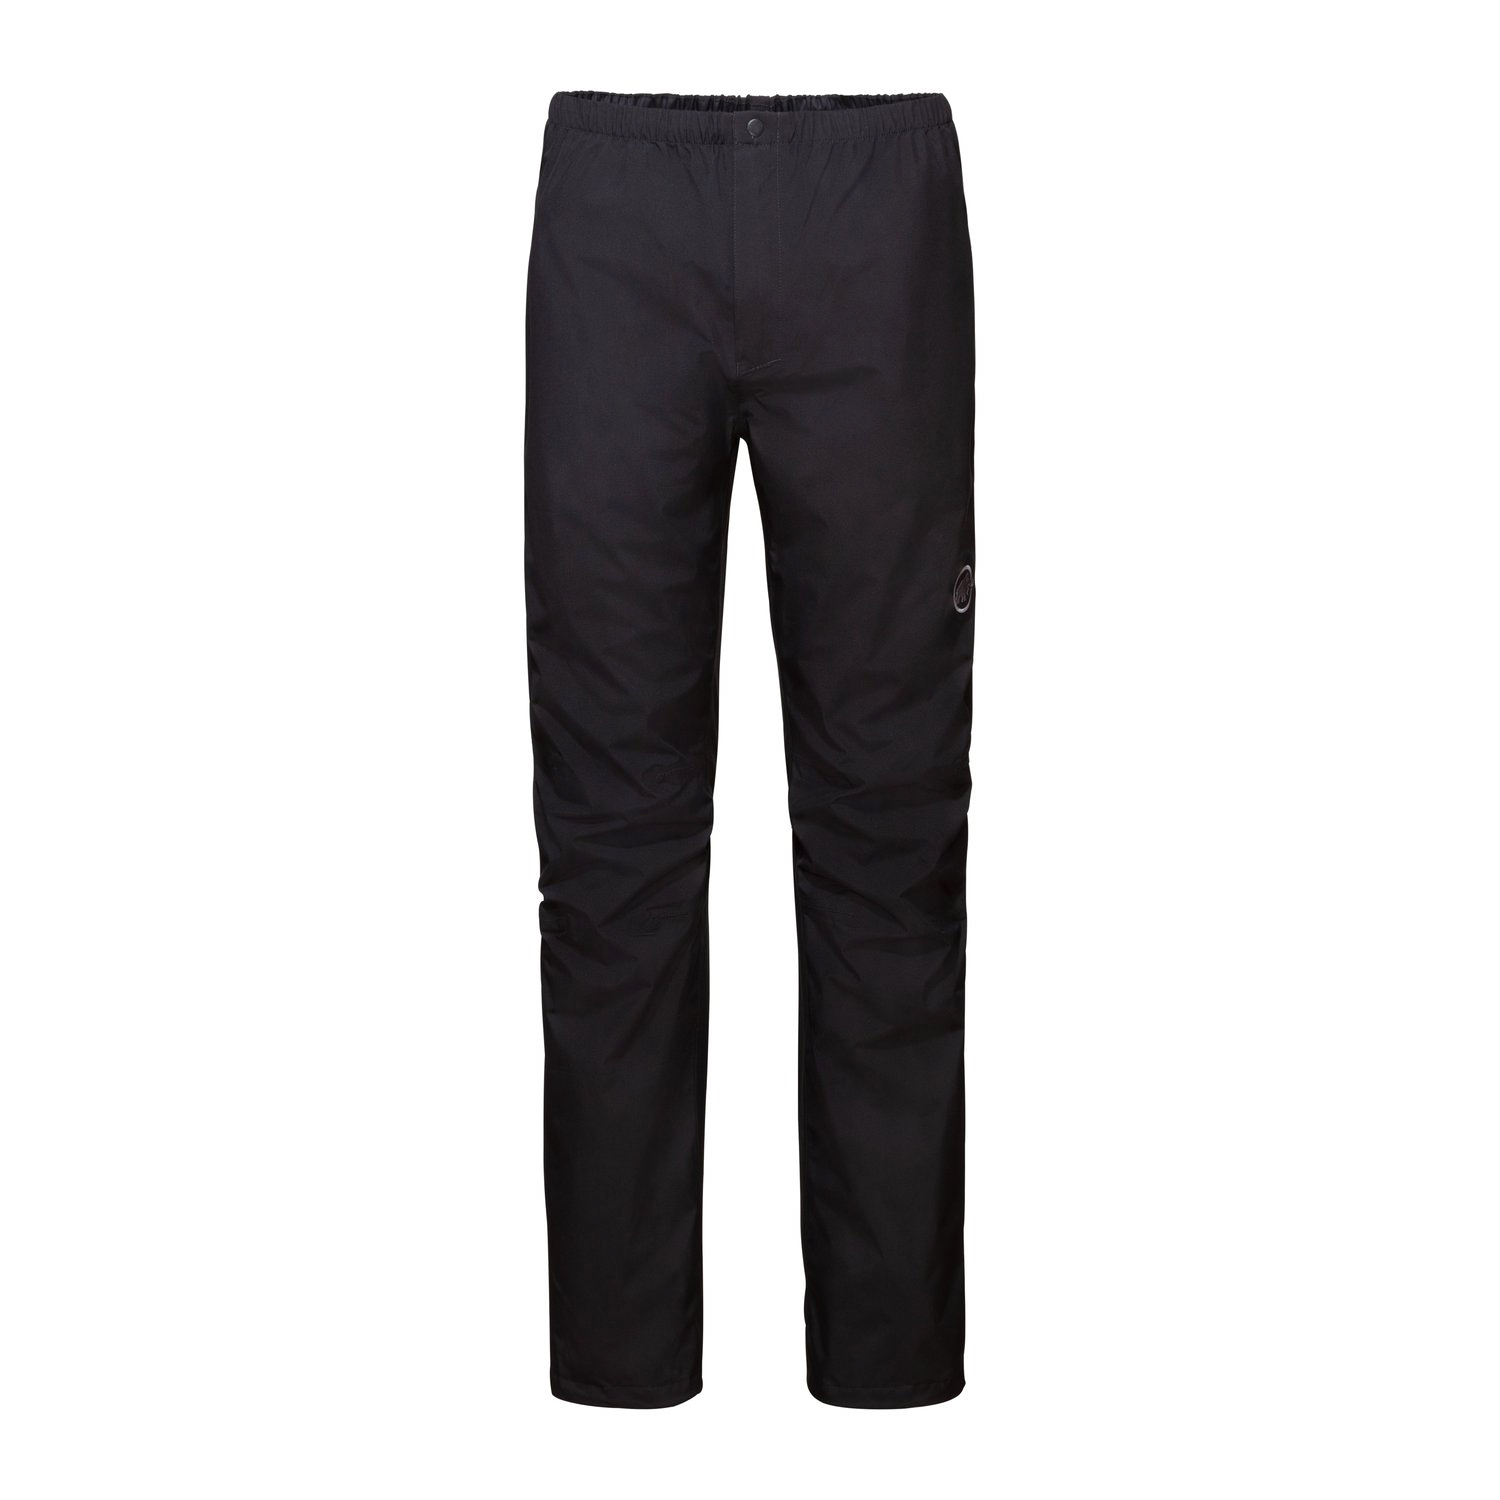 Mammut Albula HS Pants - Men's , Up to 68% Off with Free S&H